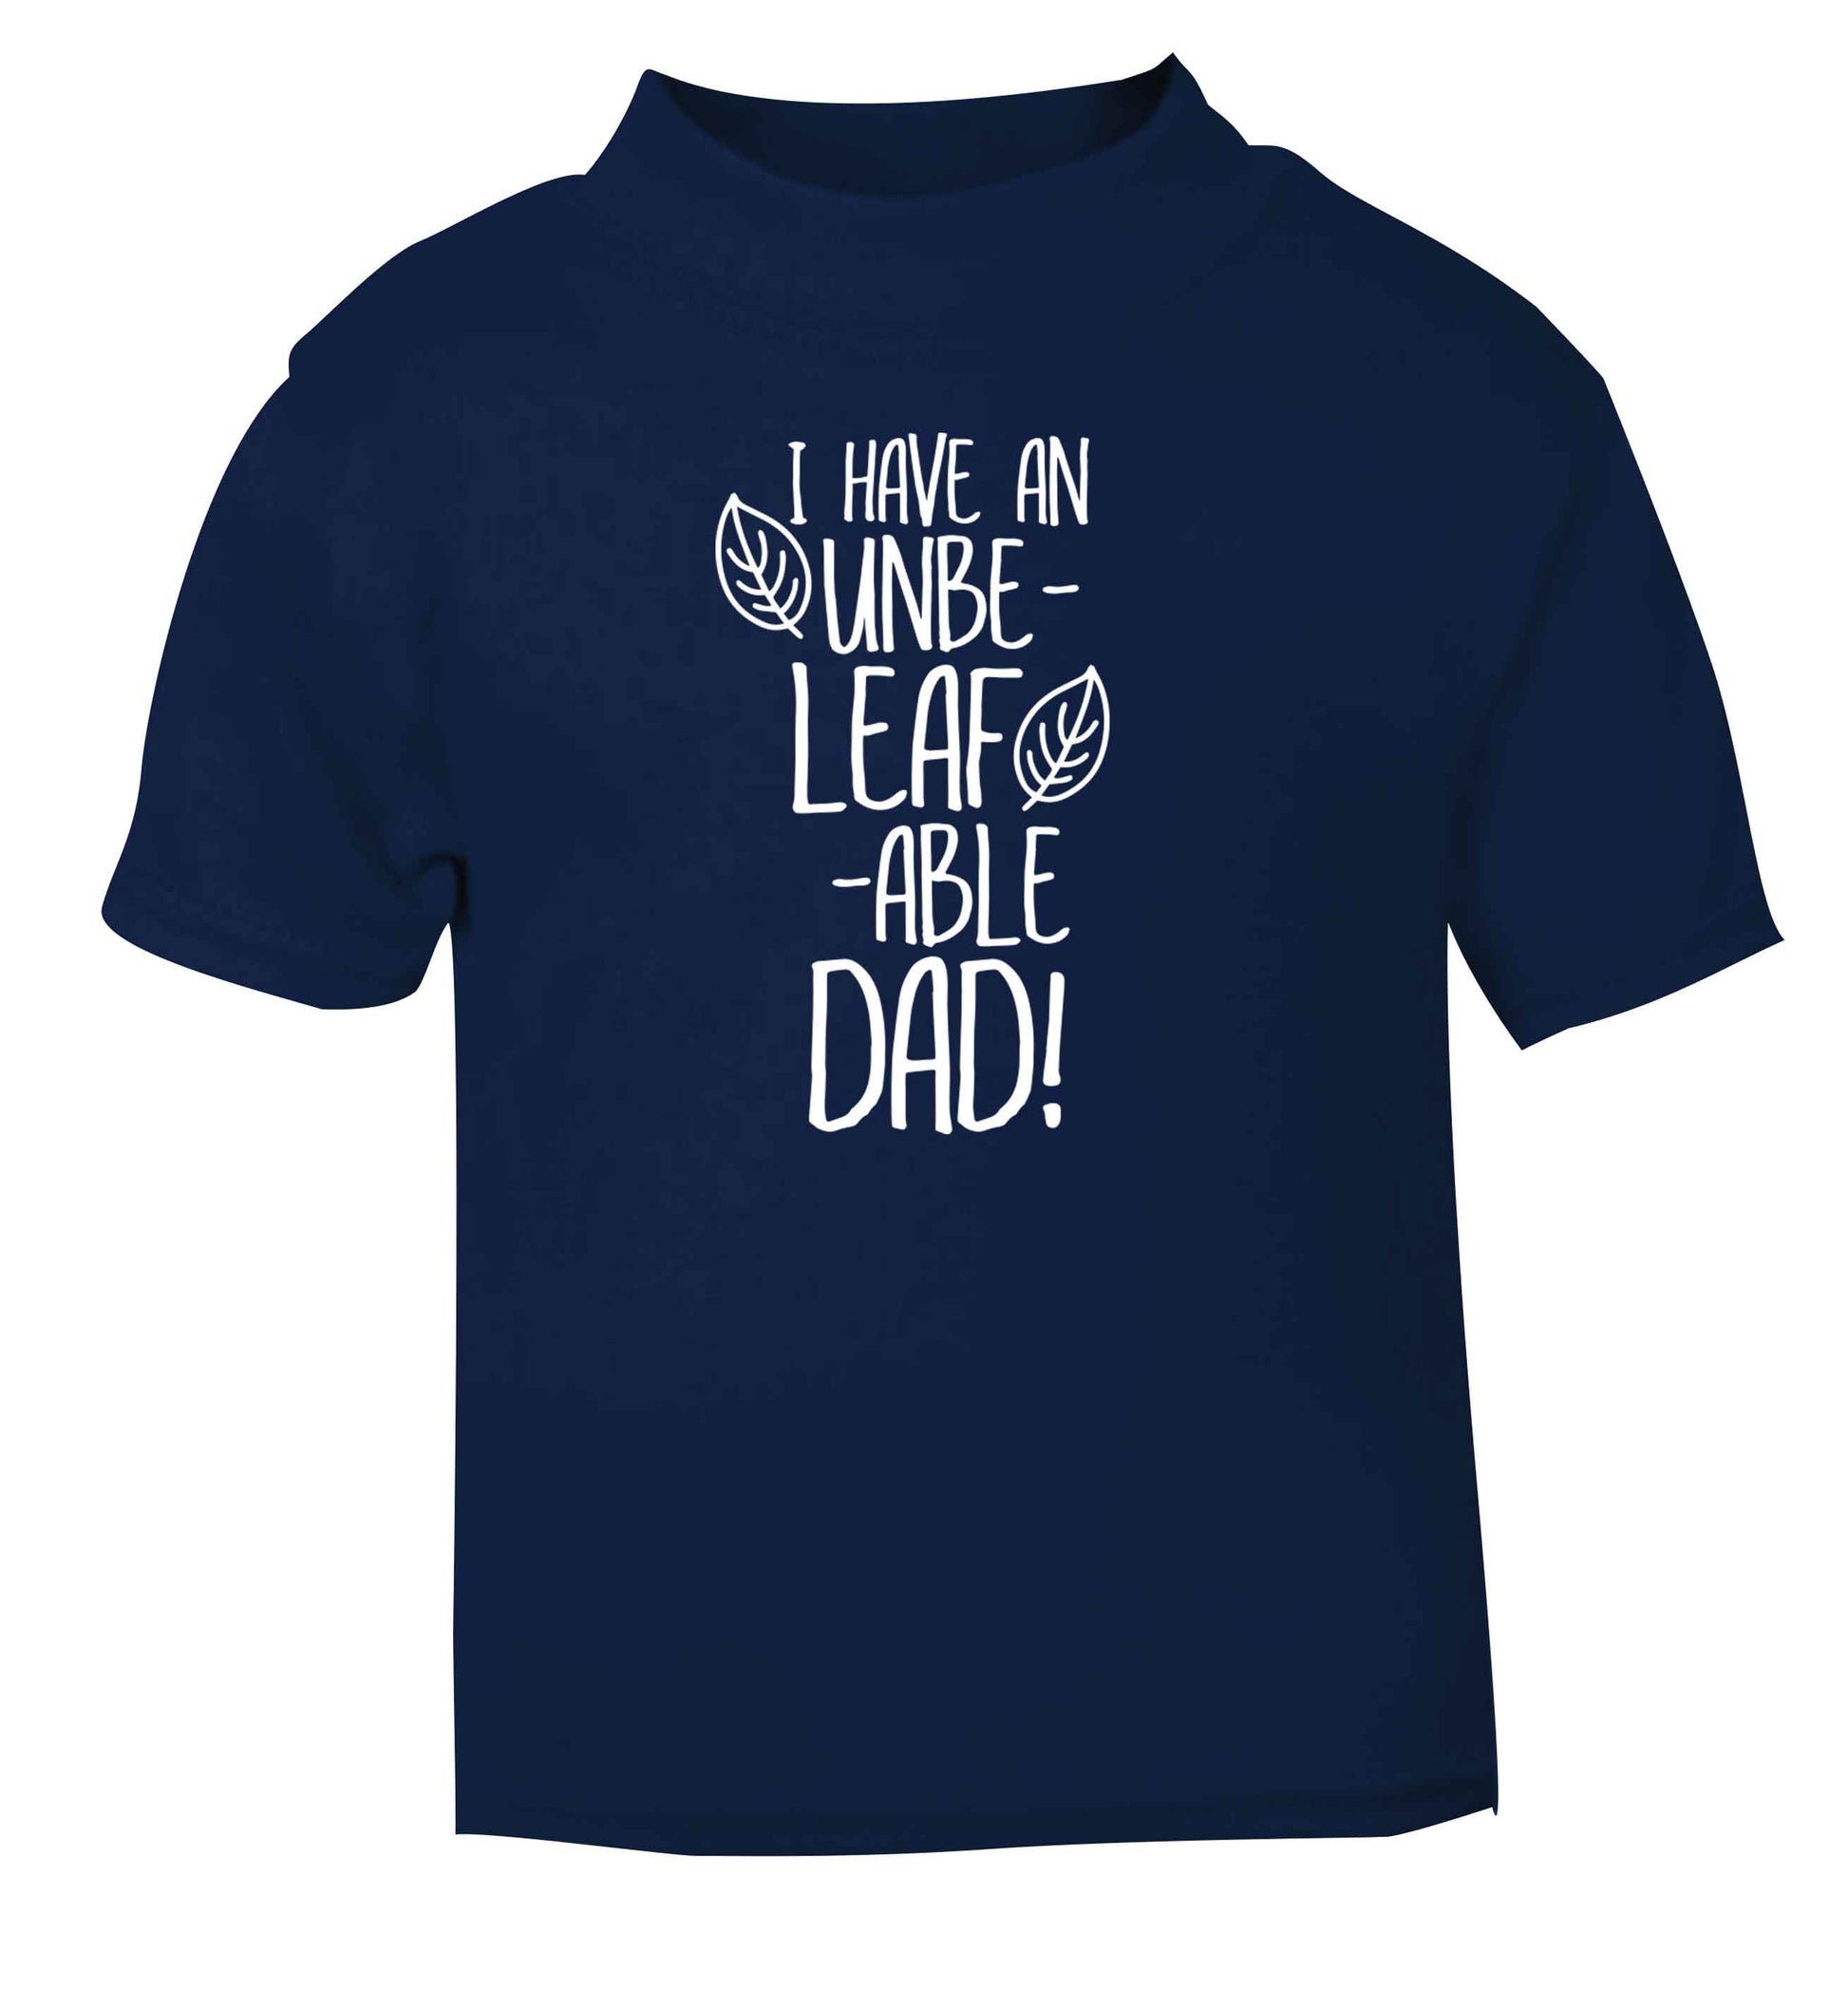 I have an unbe-leaf-able dad navy Baby Toddler Tshirt 2 Years